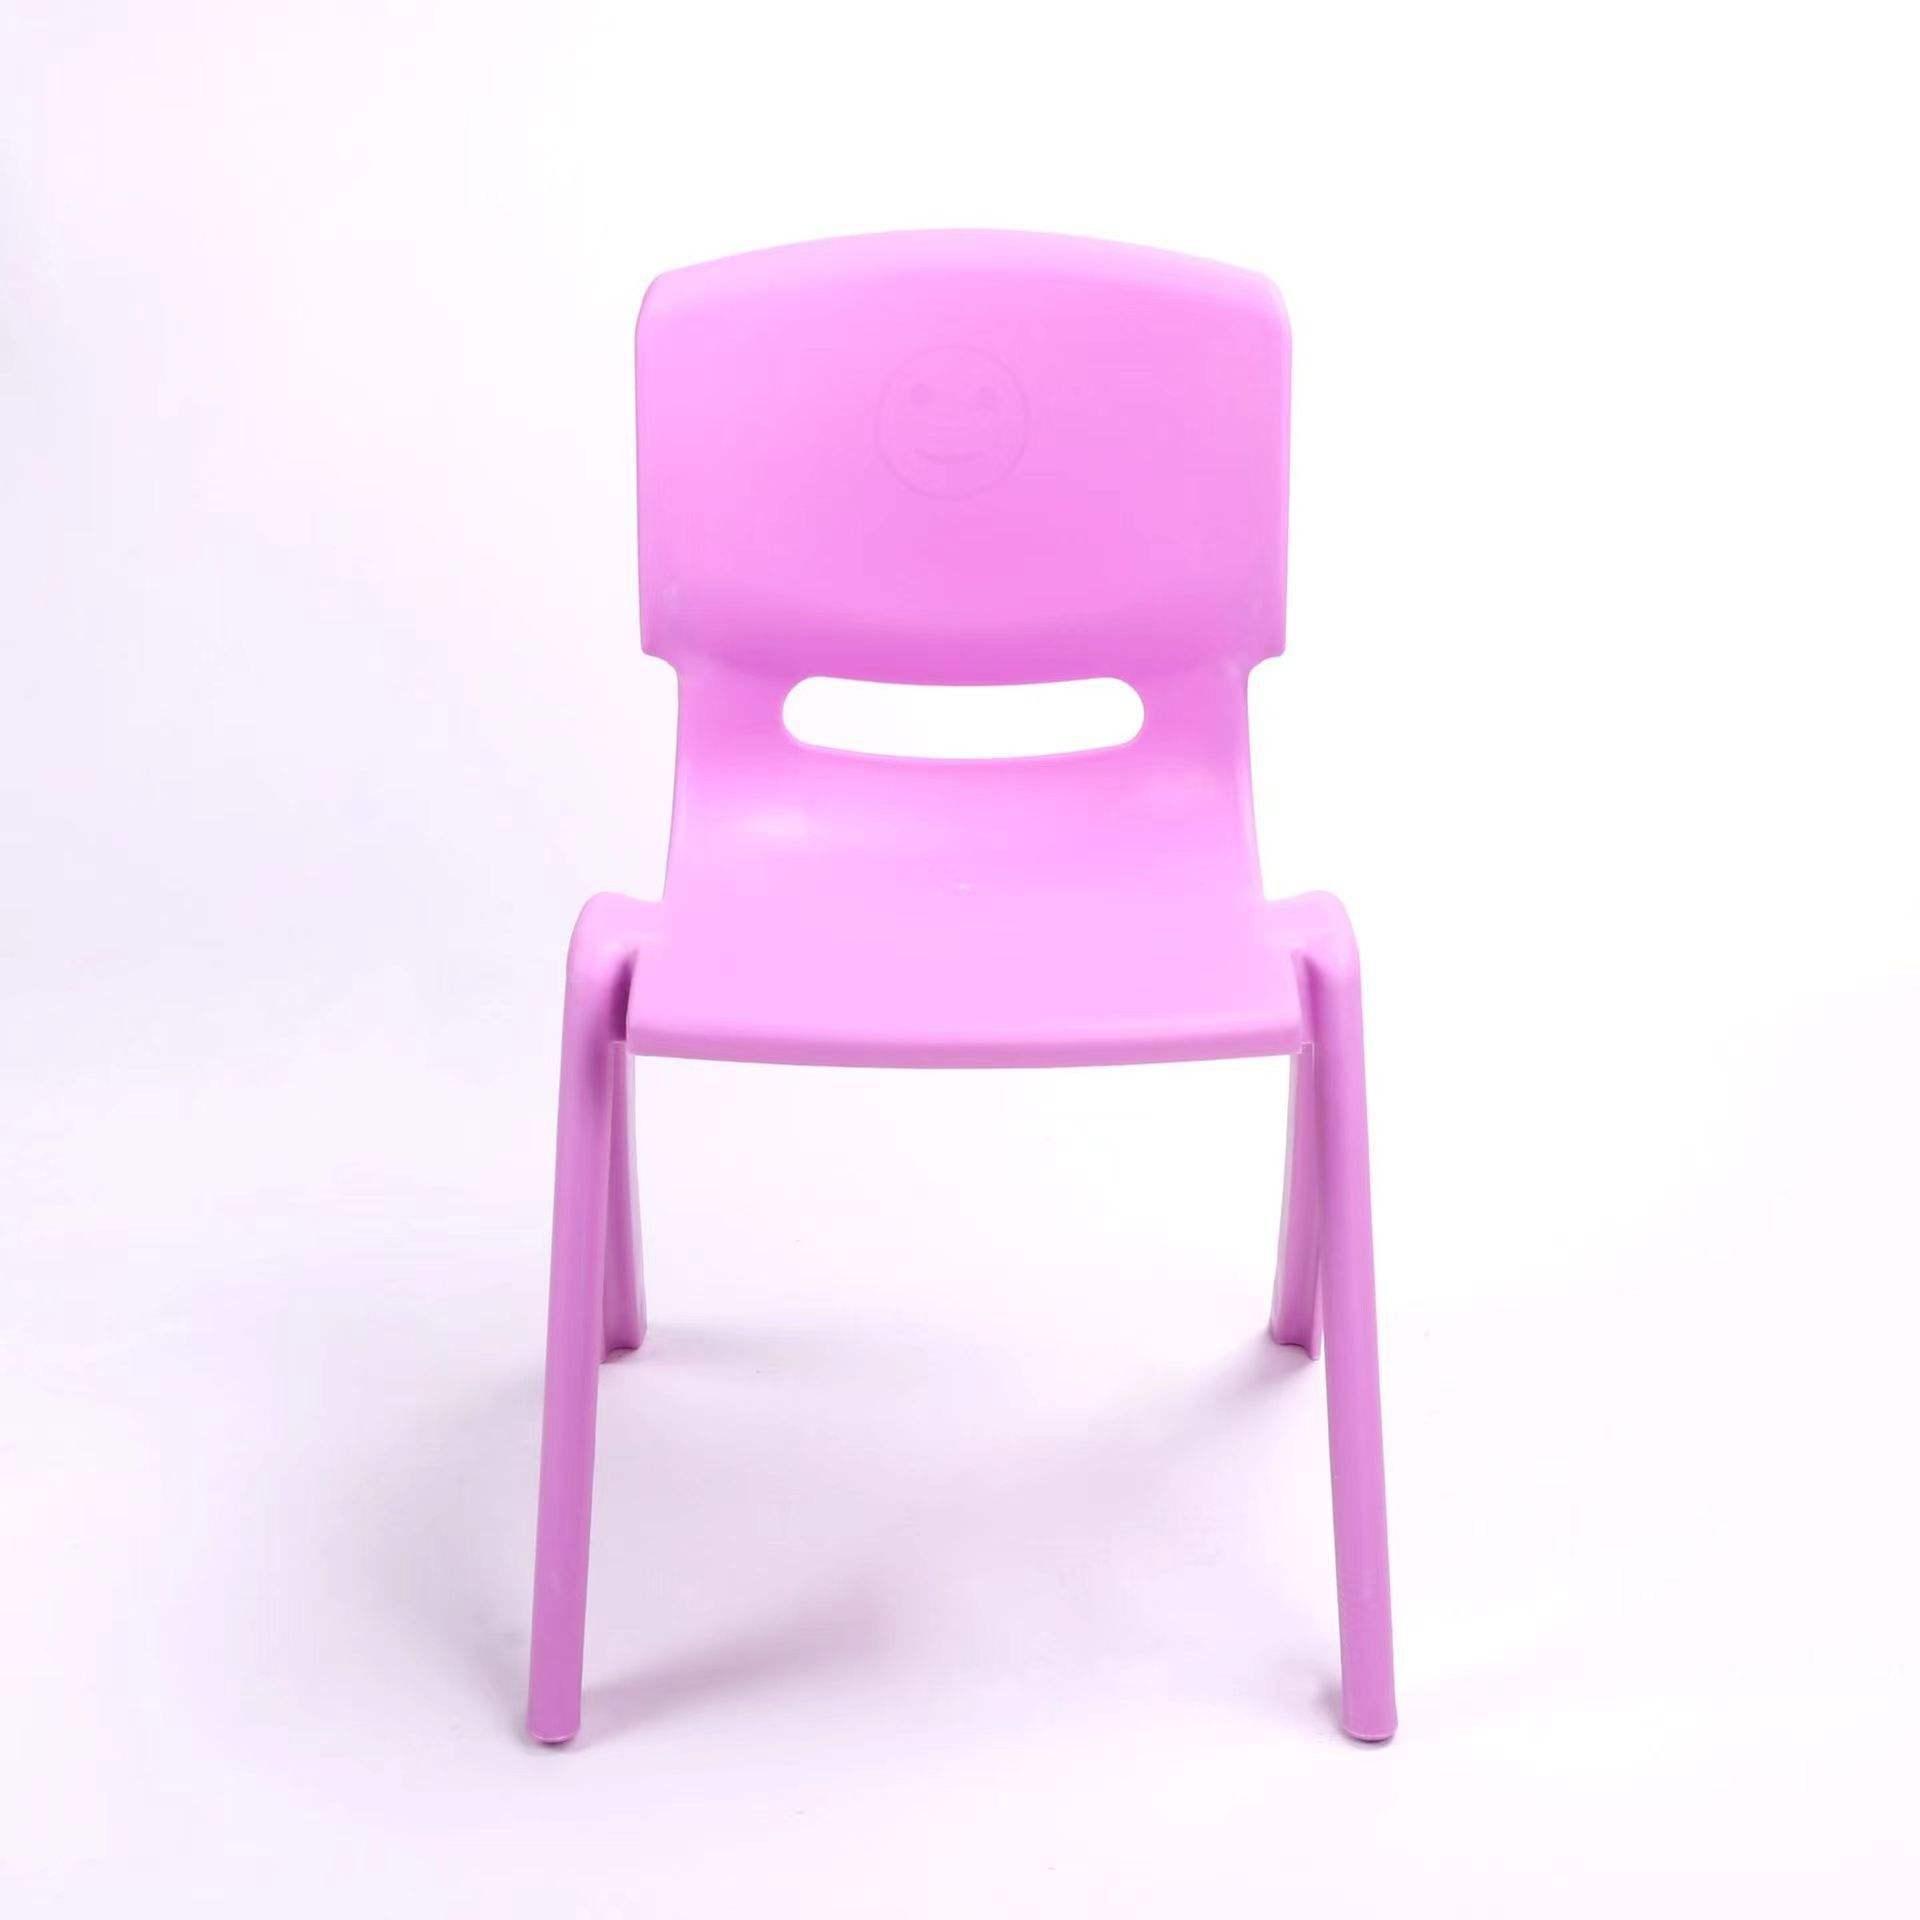 modern chair in outdoor plastic chair mould